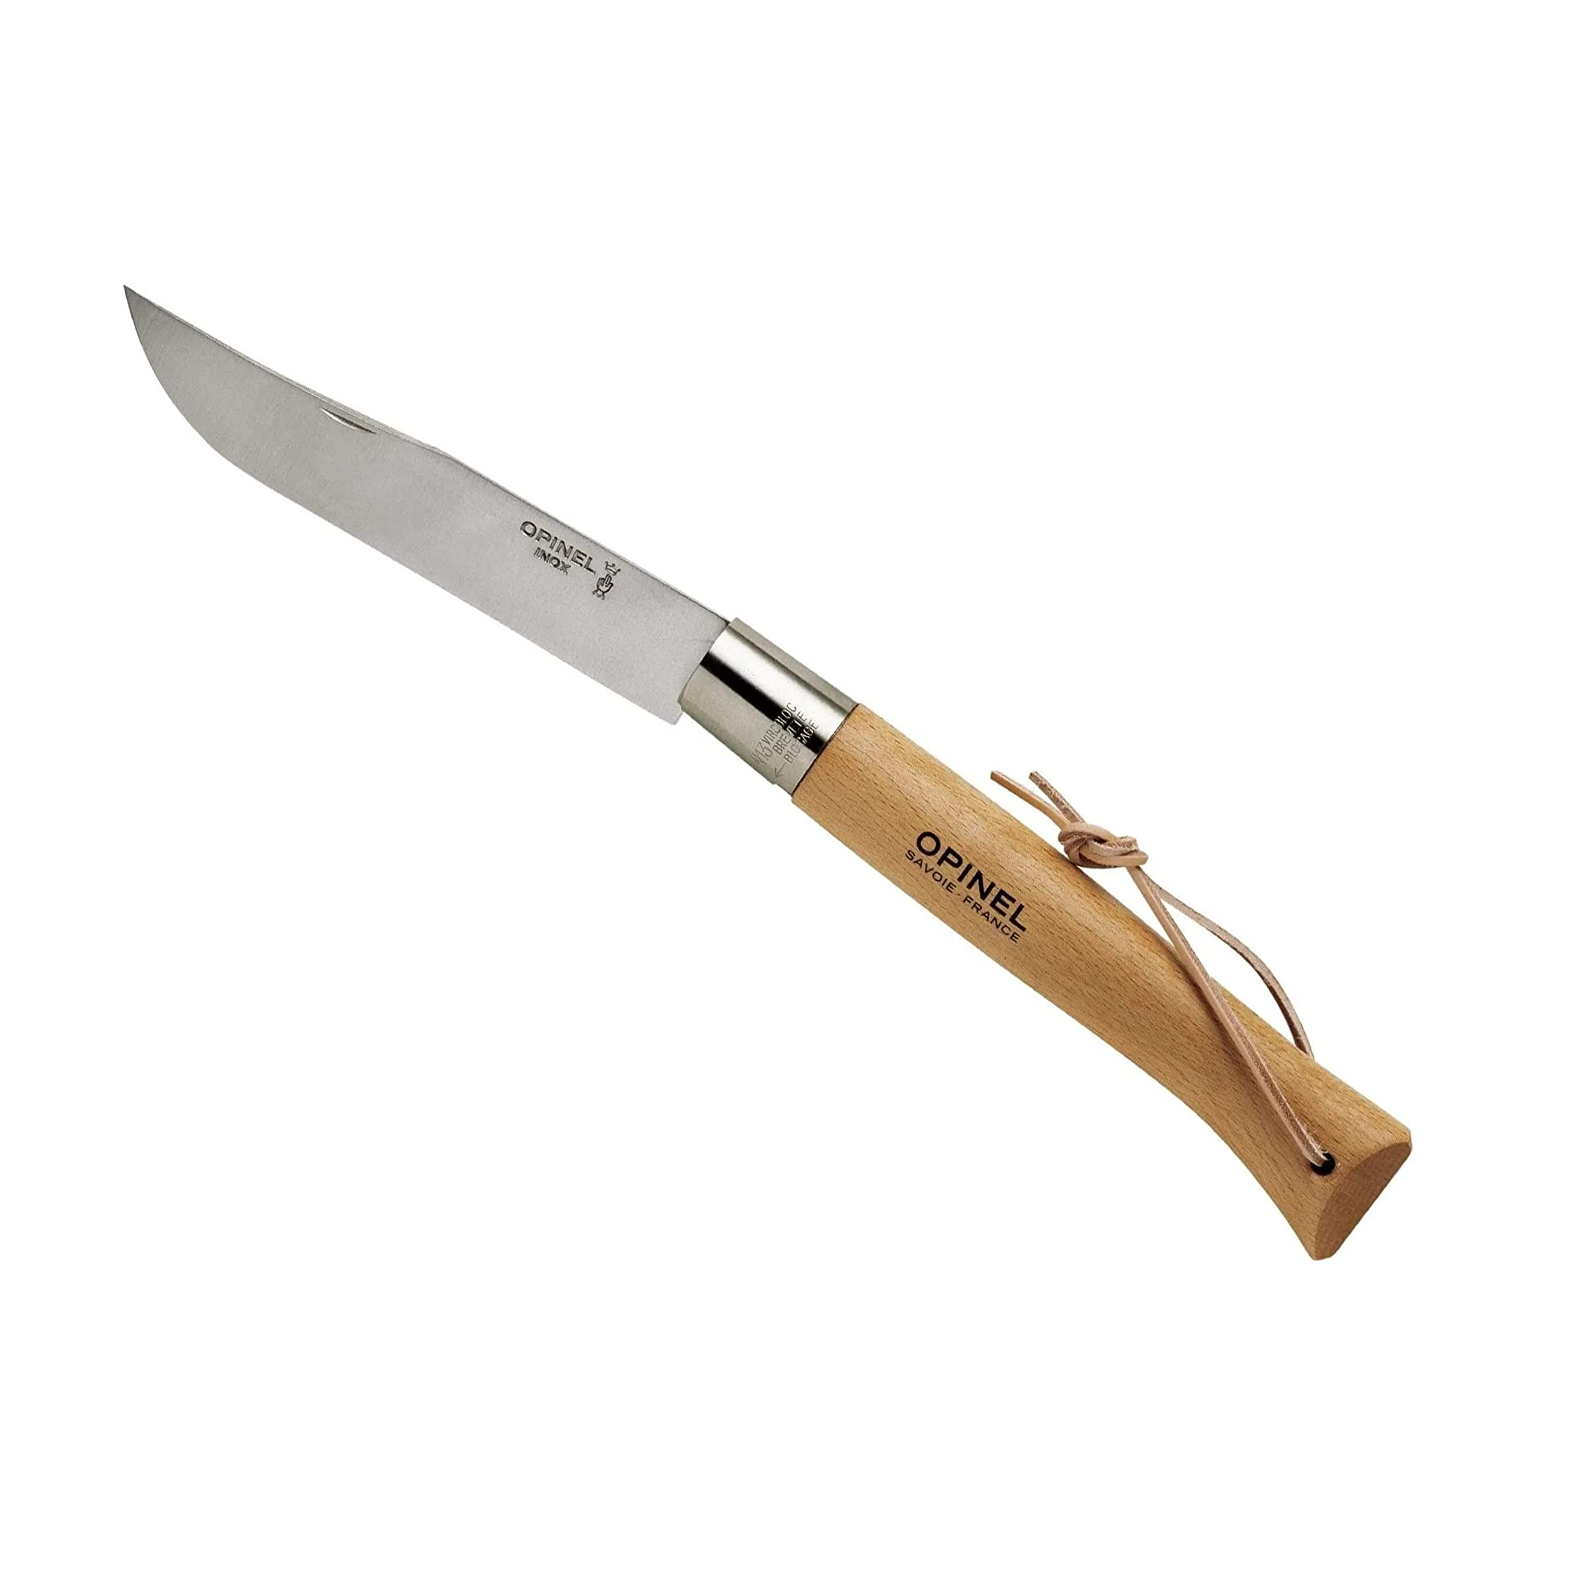 Opinel No.13 Giant Stainless Steel Folding Knife